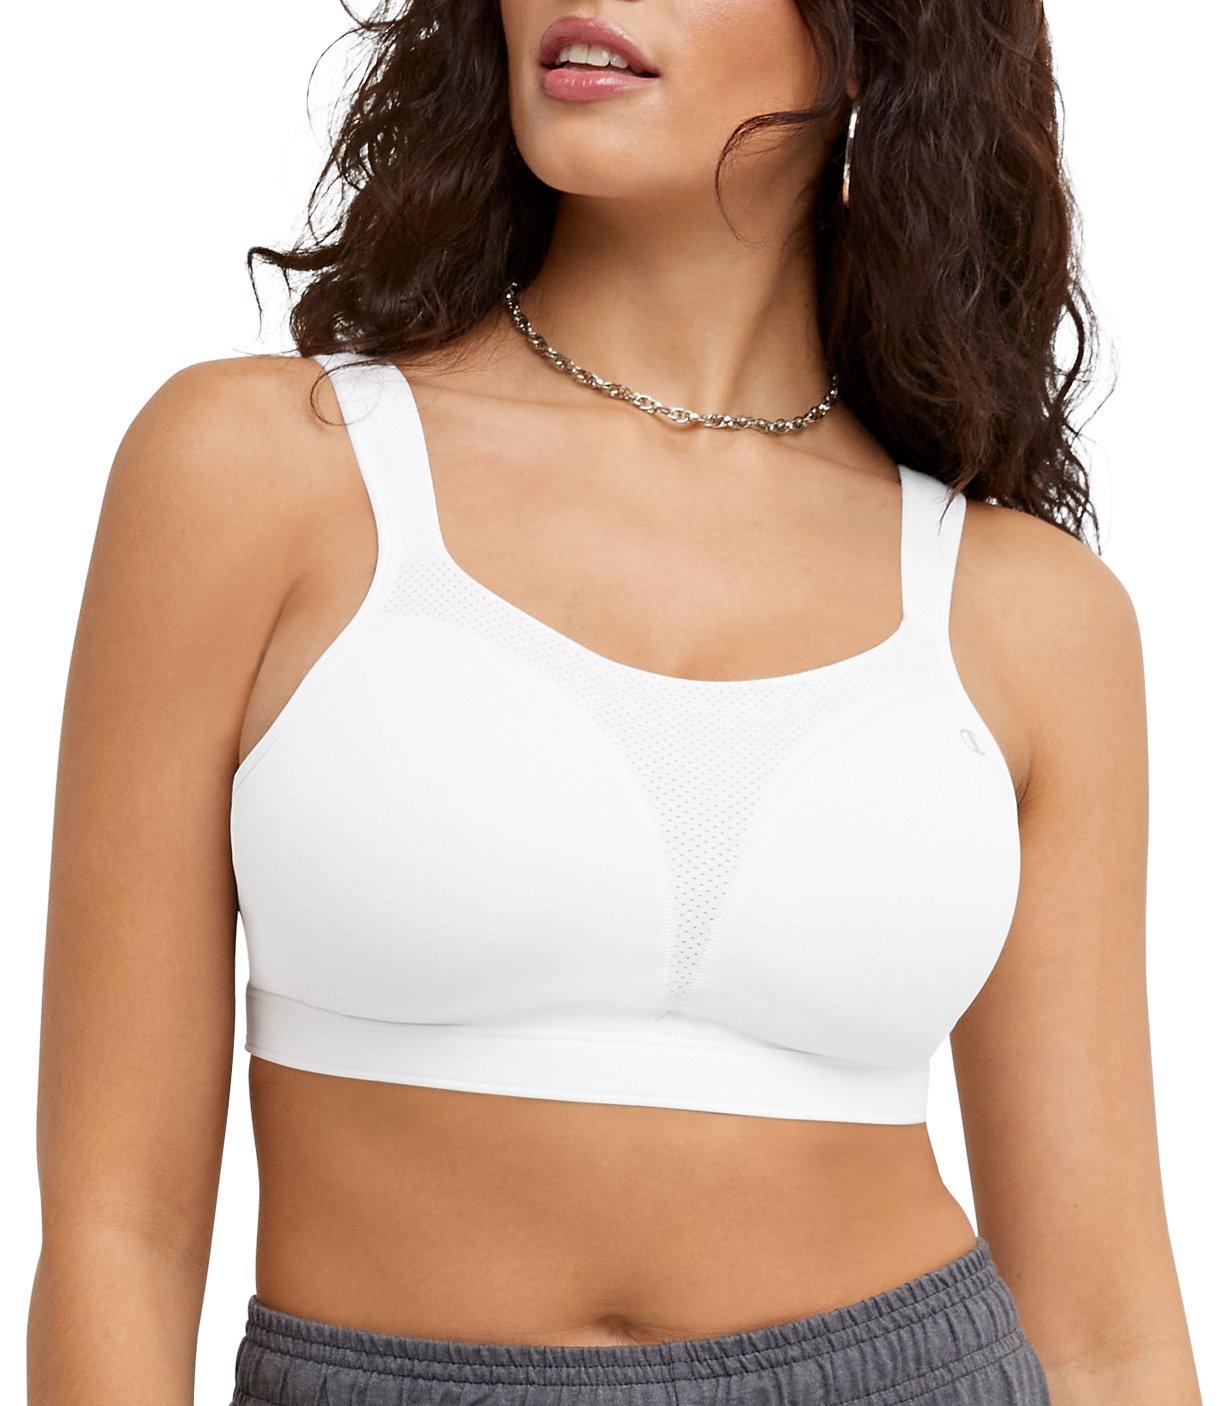 Womens Double Dry Full Support Sports Bra